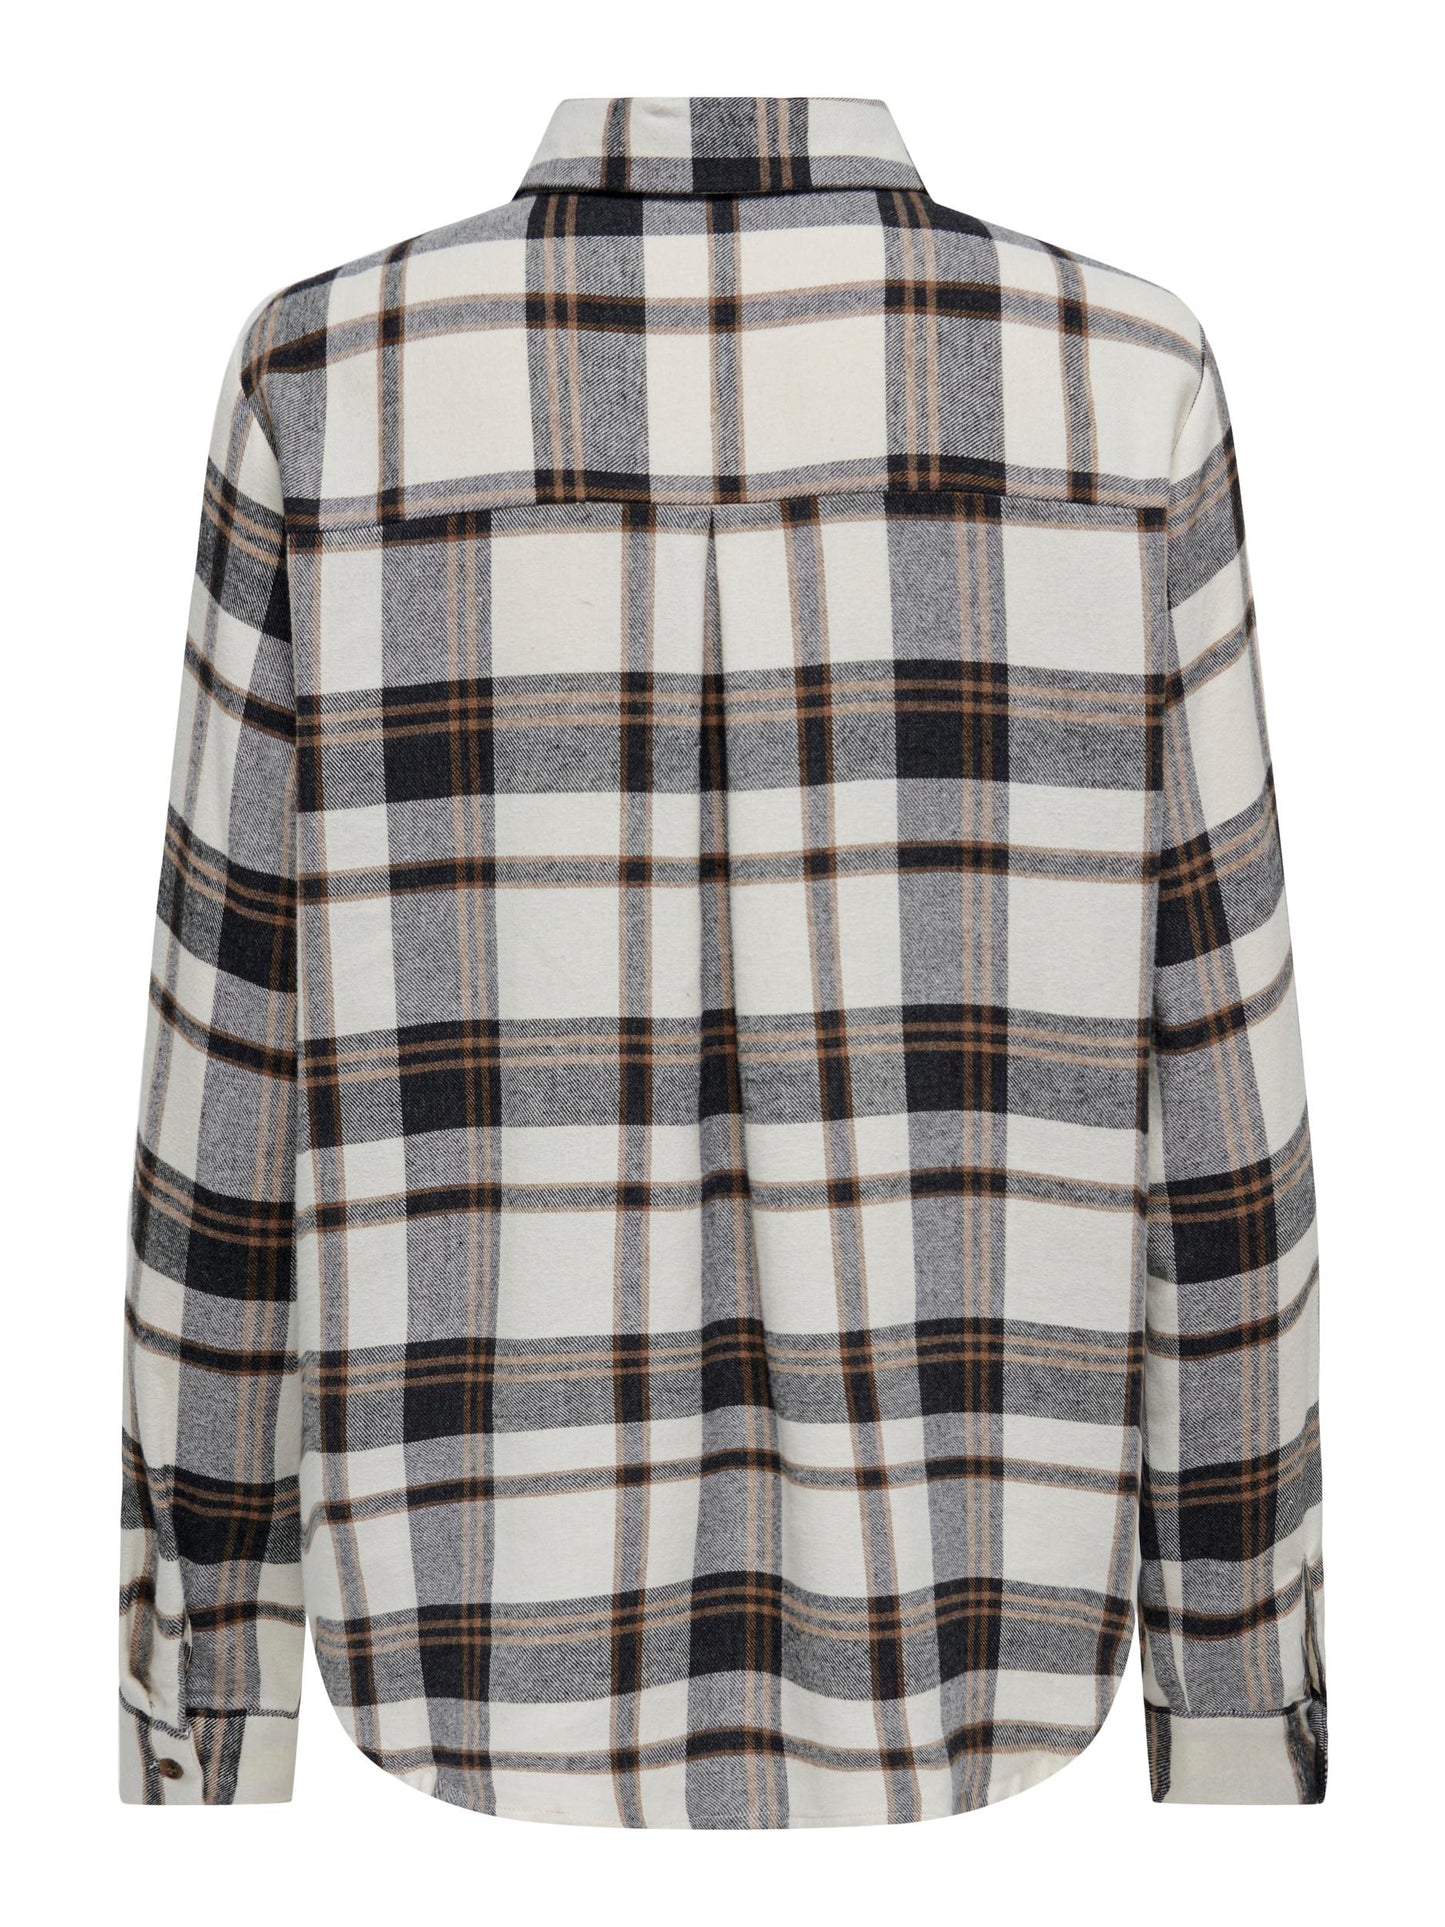 Fie Check Shirt - Black/Toasted Coconut